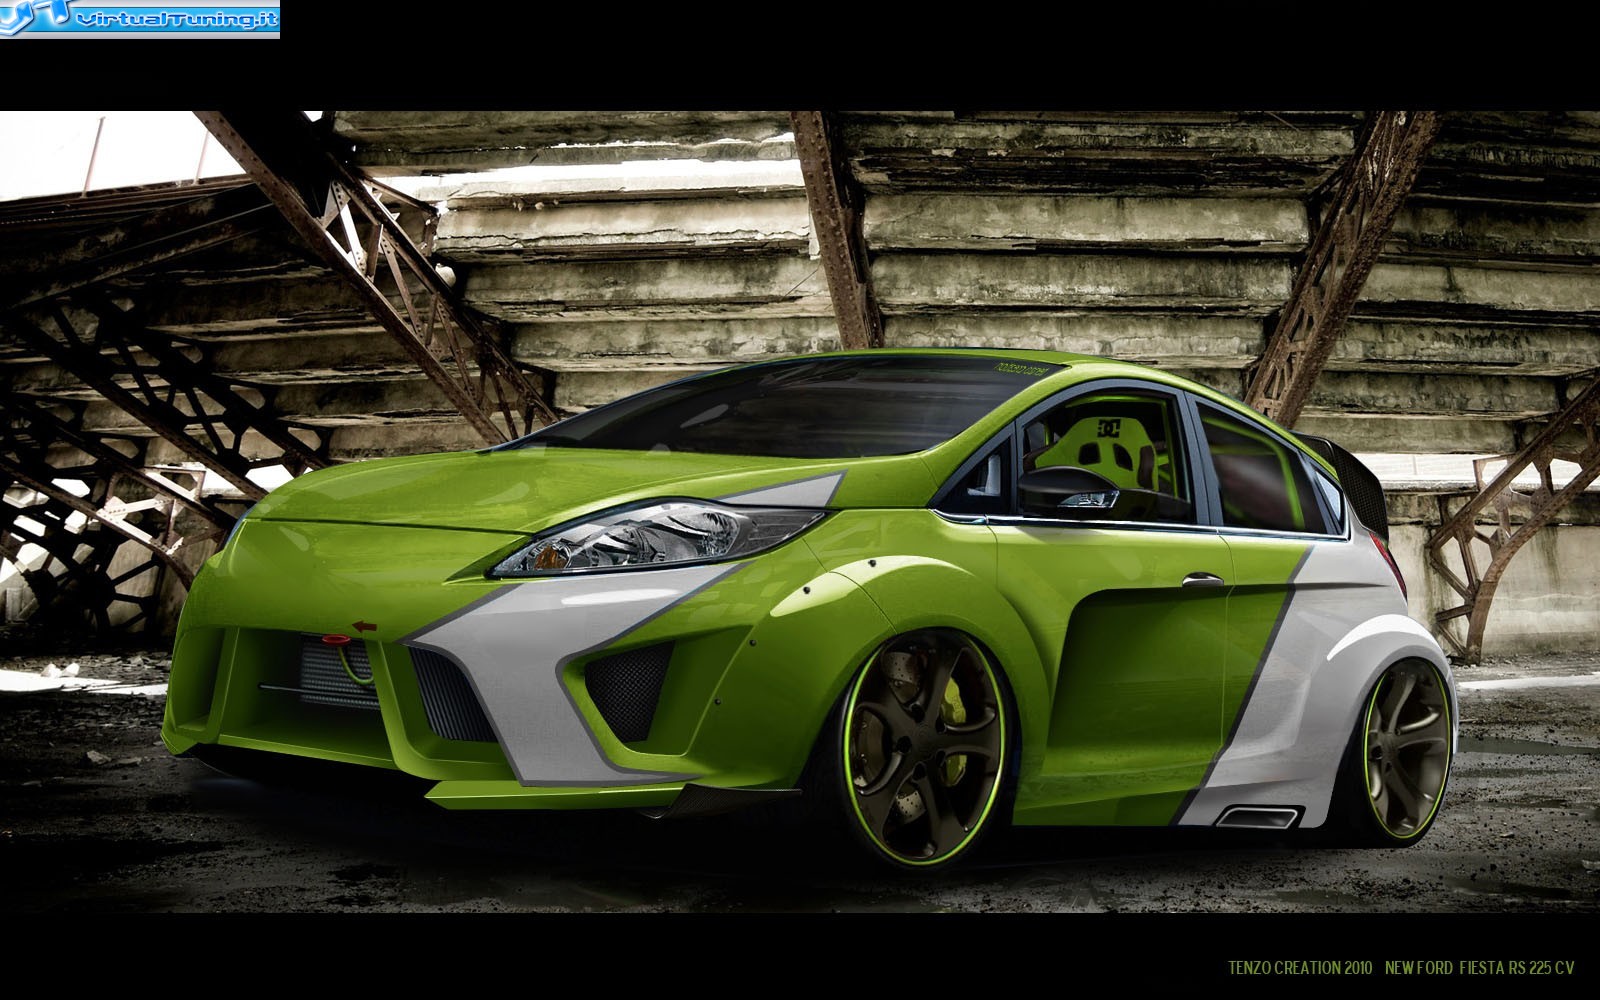 VirtualTuning FORD Fiesta RS by tenzo